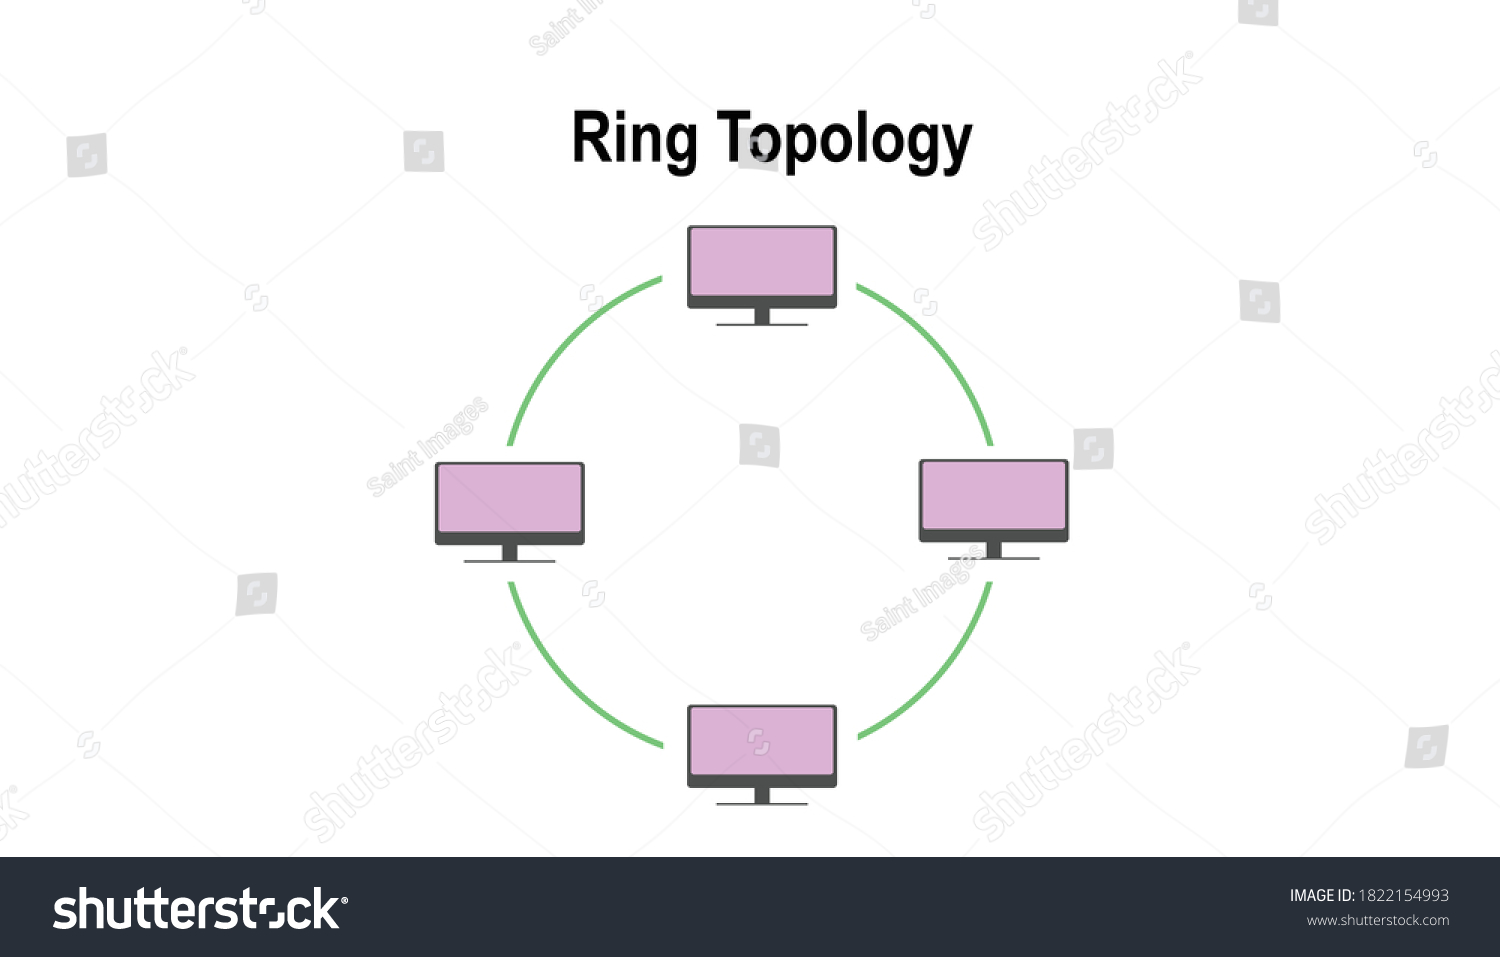 452 Ring topology Images, Stock Photos & Vectors | Shutterstock